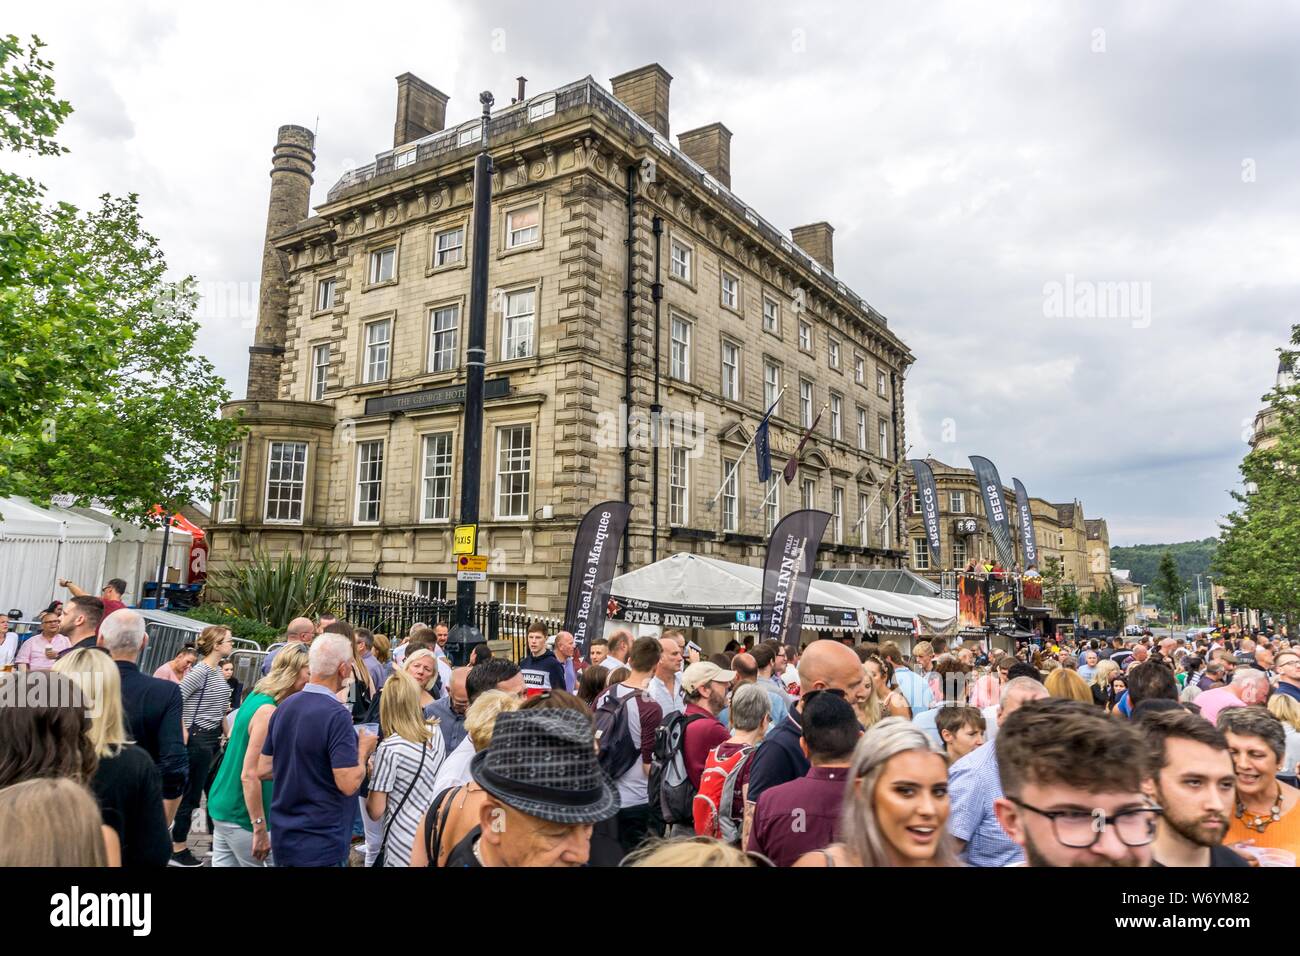 Huddersfield Food and Drink Festival 2019, St Georges Square, Huddersfield, West Yorkshire, England, UK. Stock Photo